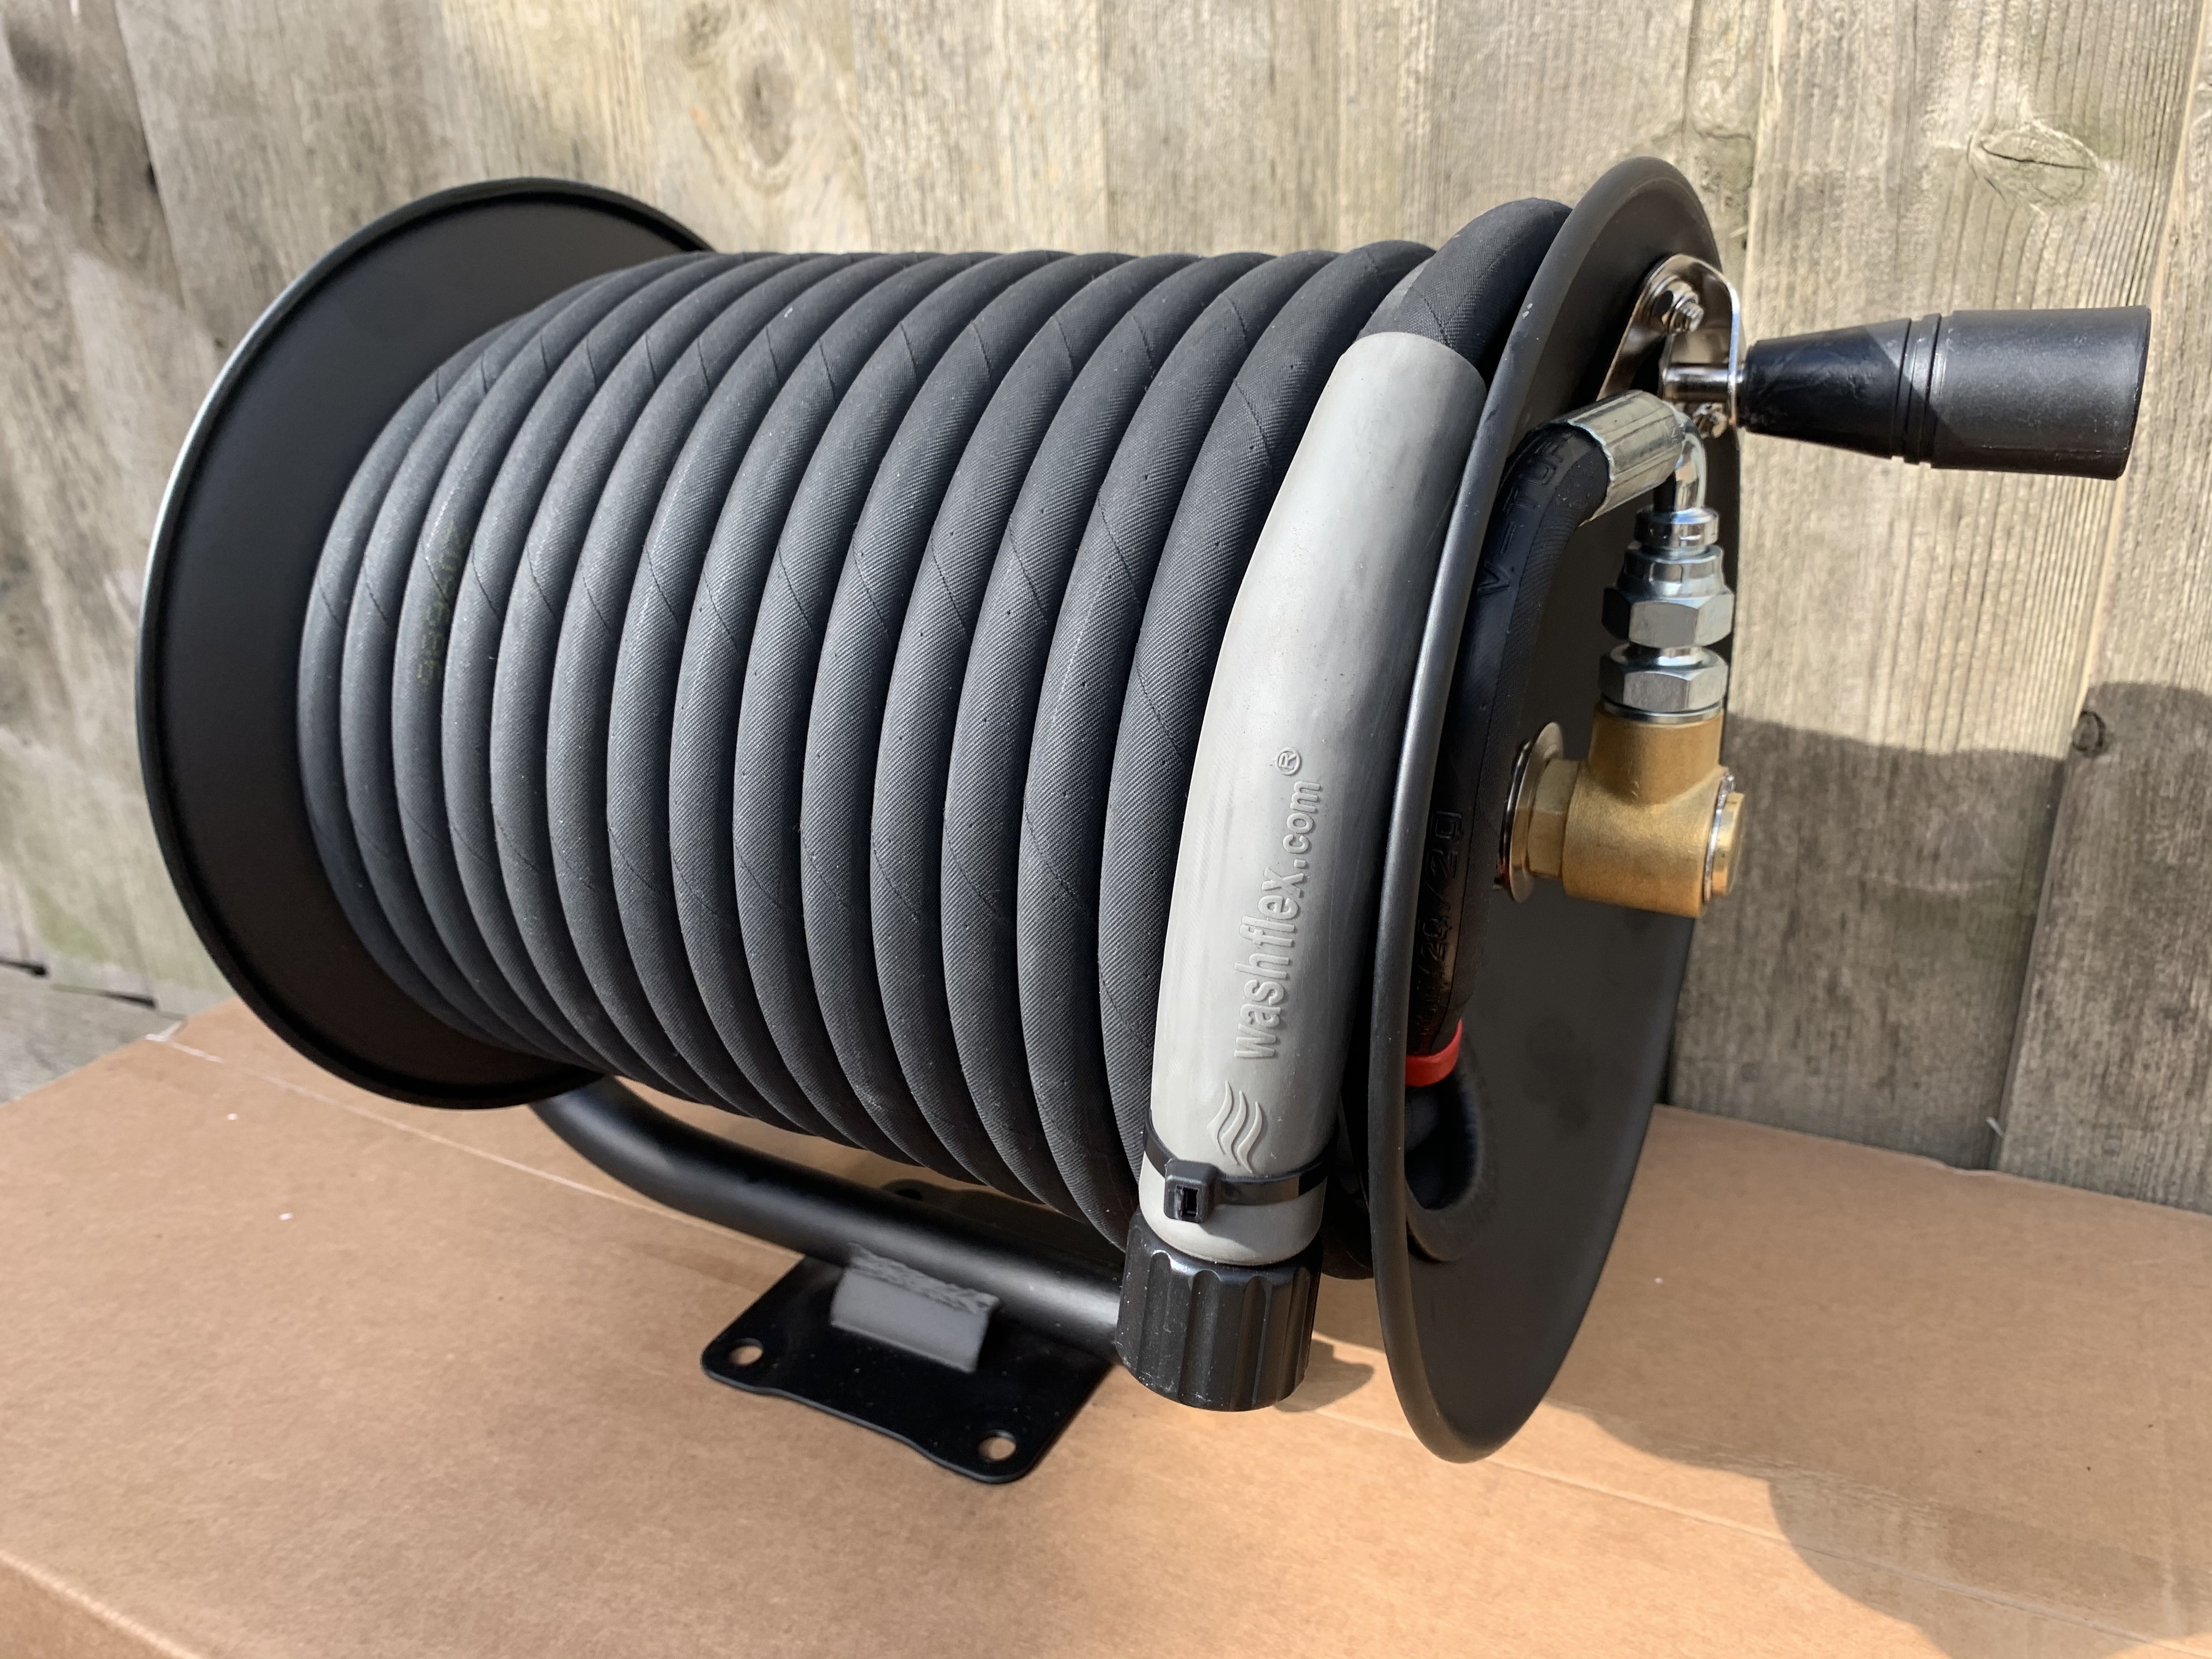 Wall Mounted 3/8 High pressure Hose Reel kit complete with Hose, Options  Available: 20, 25, 30, 35, 40, 45 & 50Mtr HRK020 - £ 190.58 Incl. Vat